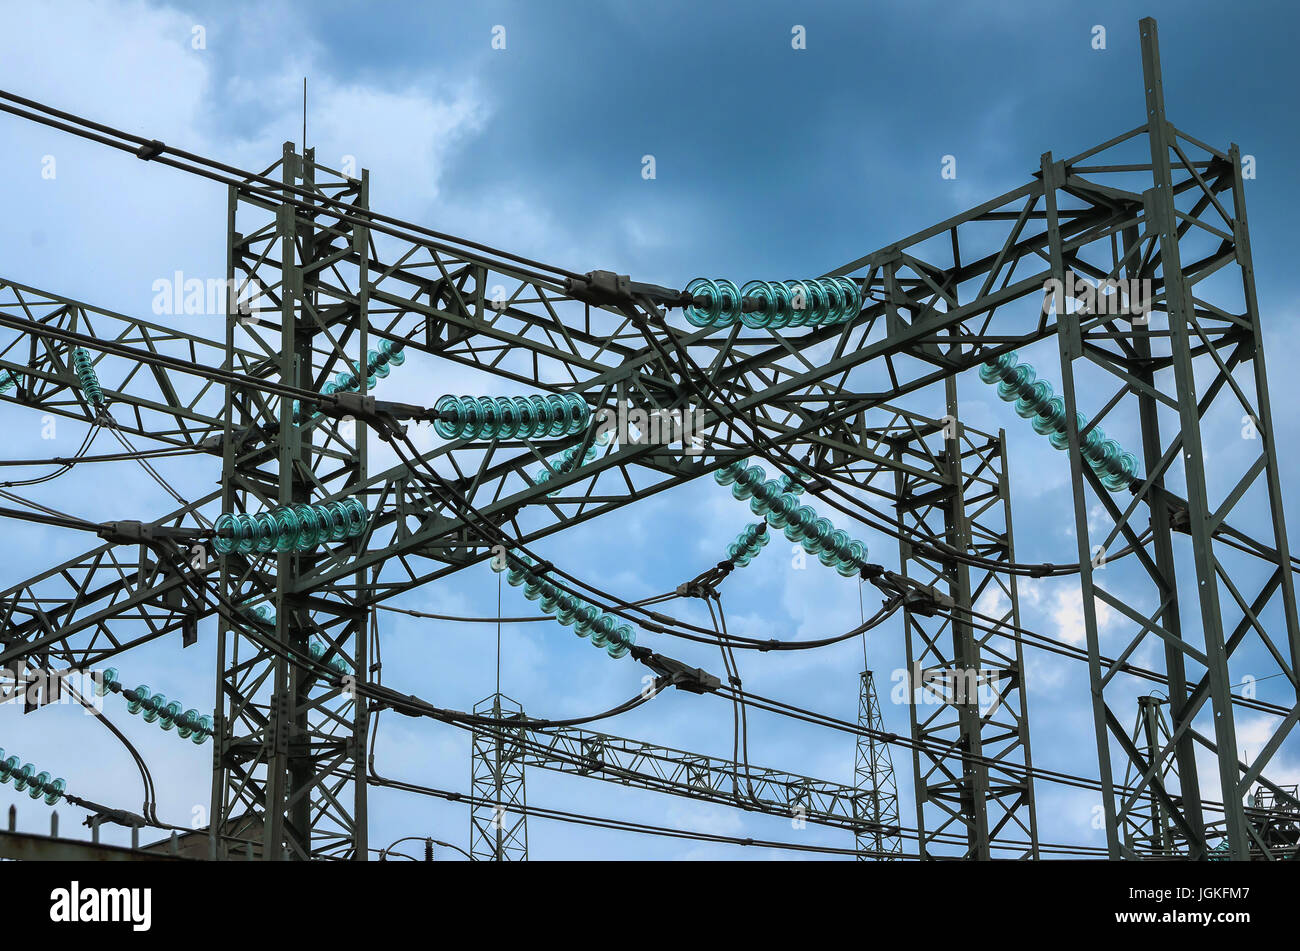 Electricity. Distribution electric substation with power lines and transformers. Stock Photo